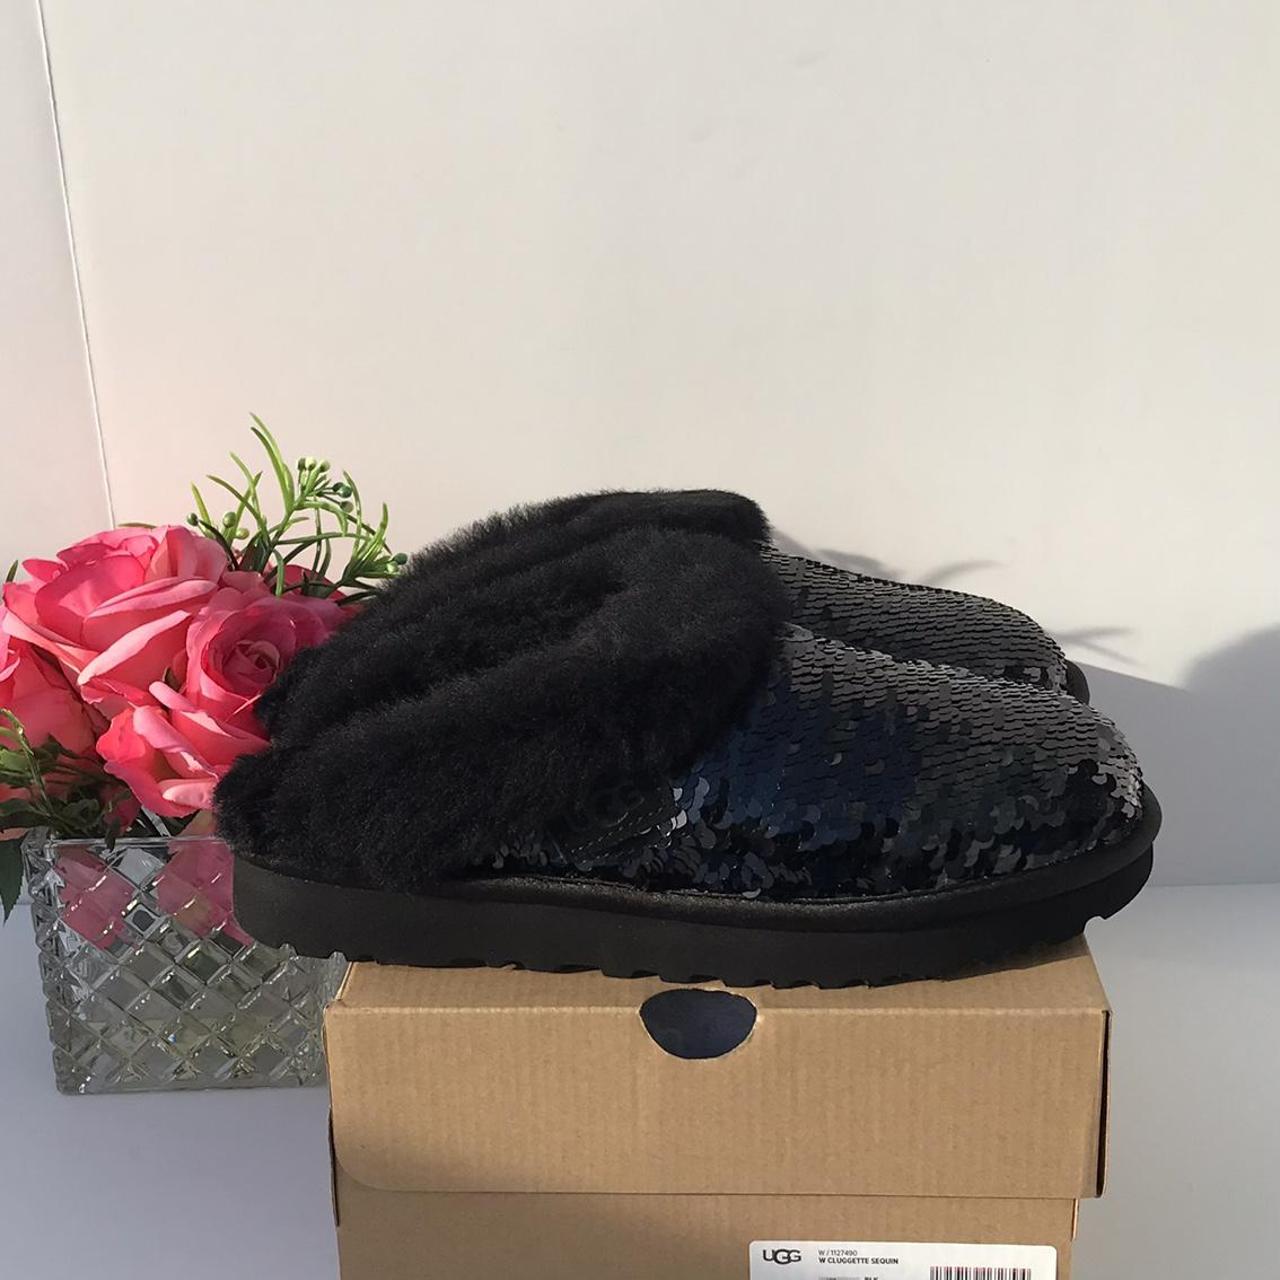 UGG Cluggette Sequin New in a box Check holographic - Depop